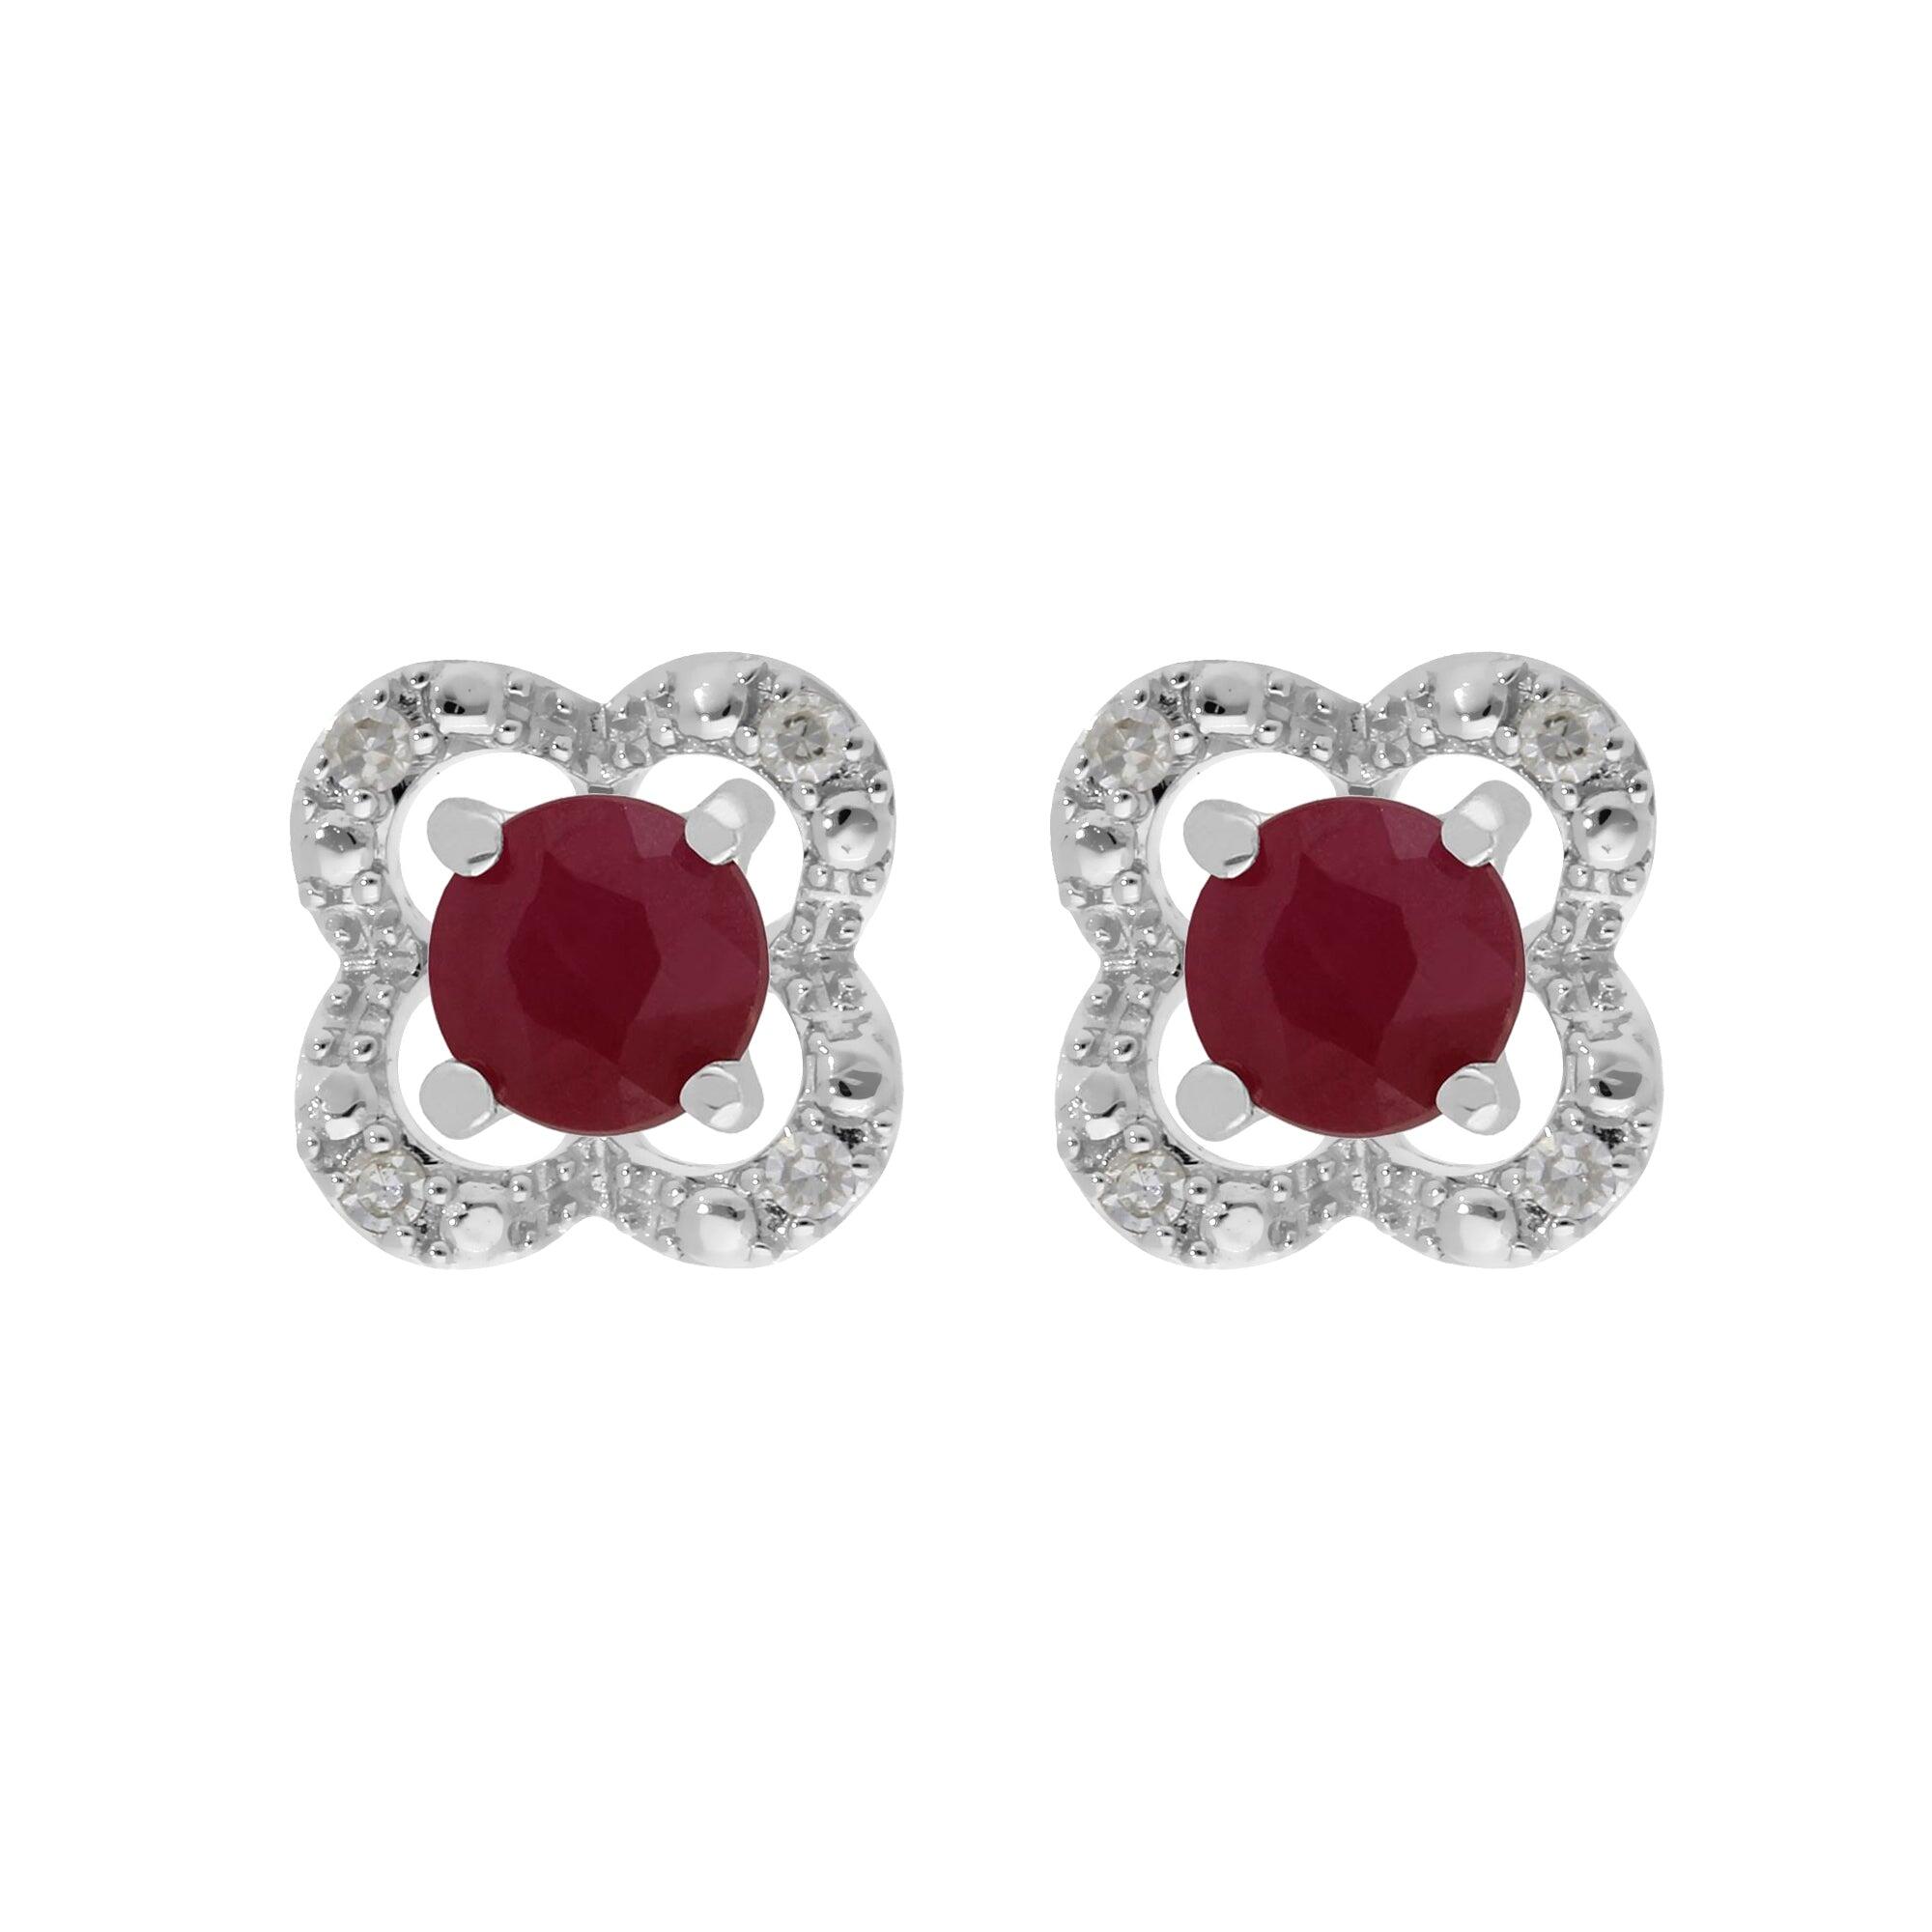 Classic Round Ruby Stud Earrings with Detachable Diamond Flower Ear Jacket in 9ct White Gold